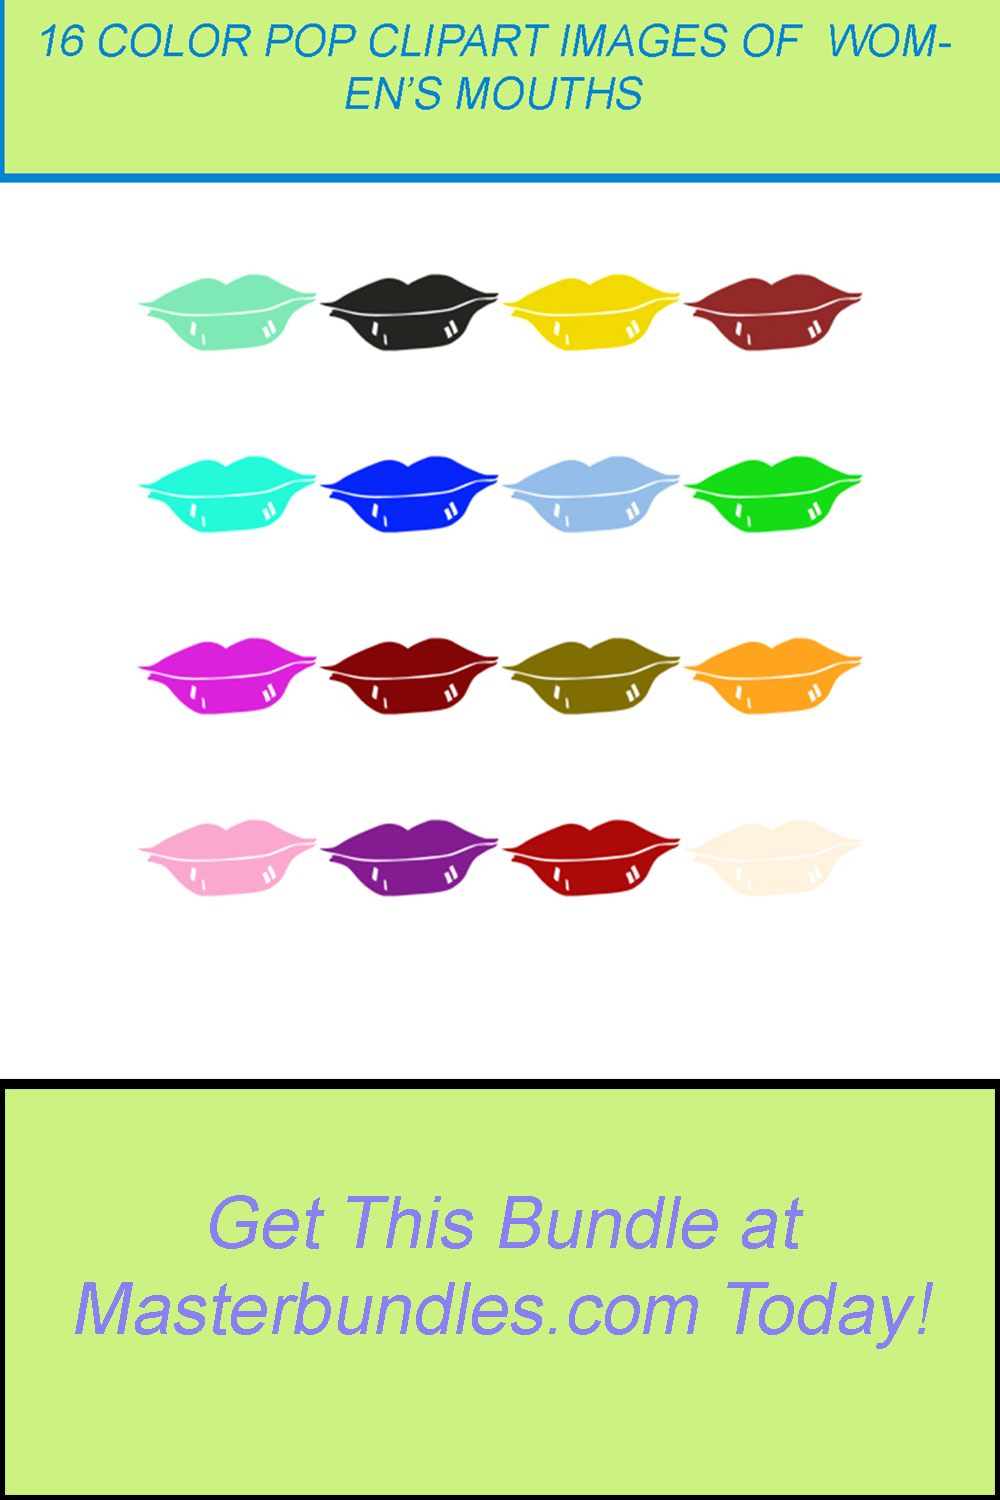 16 COLOR POP CLIPART IMAGES OF MOUTH OF WOMAN pinterest preview image.